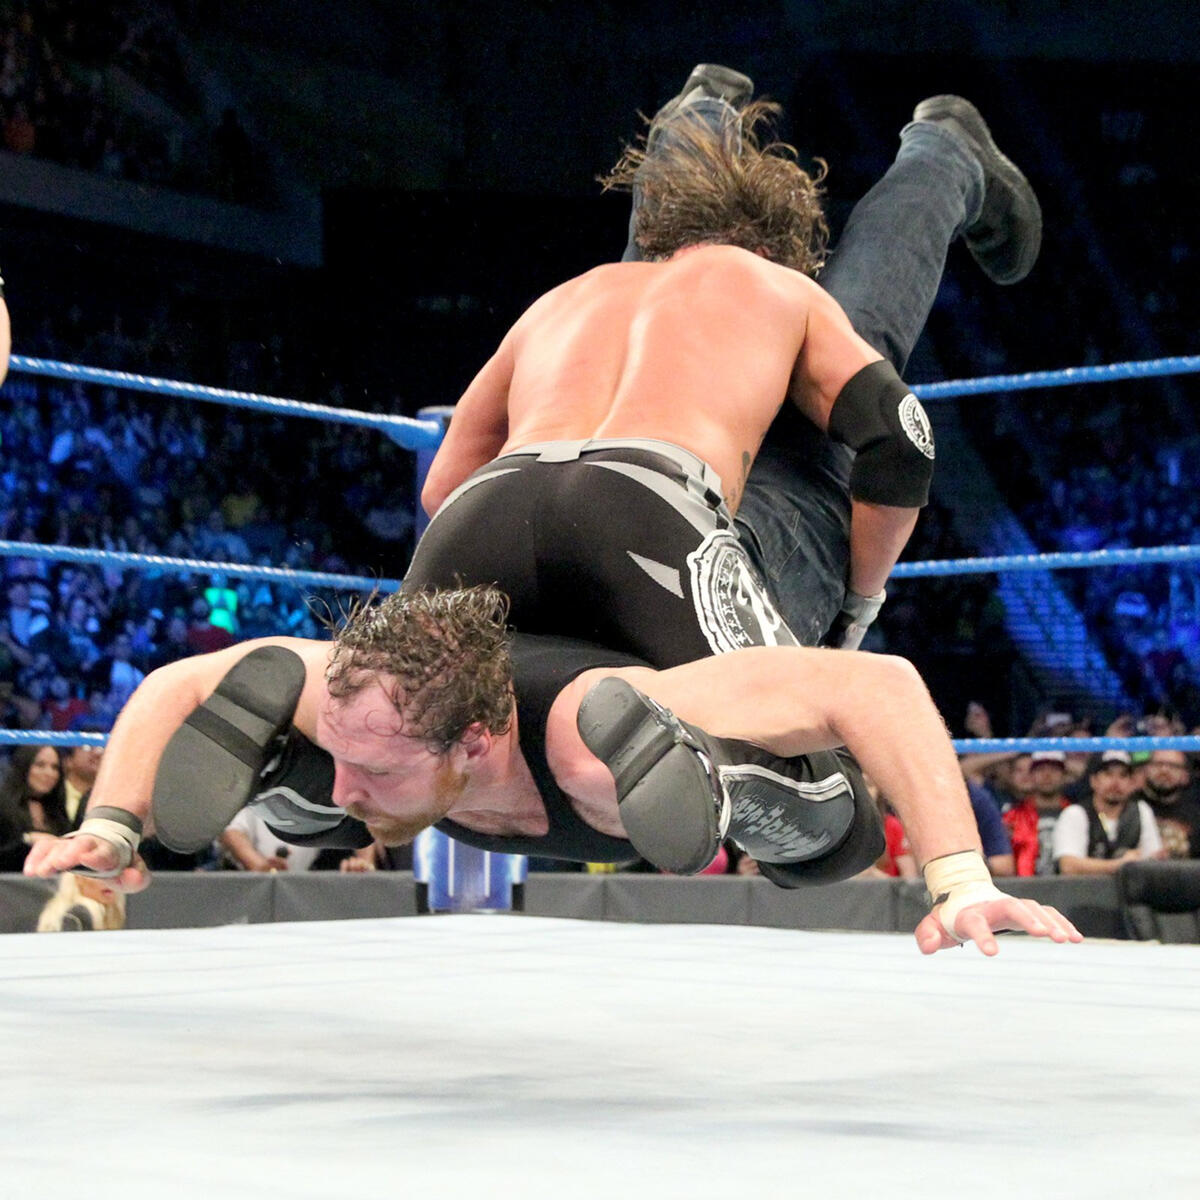 This allows Styles to capitalize with the Styles Clash on Ambrose for the win.